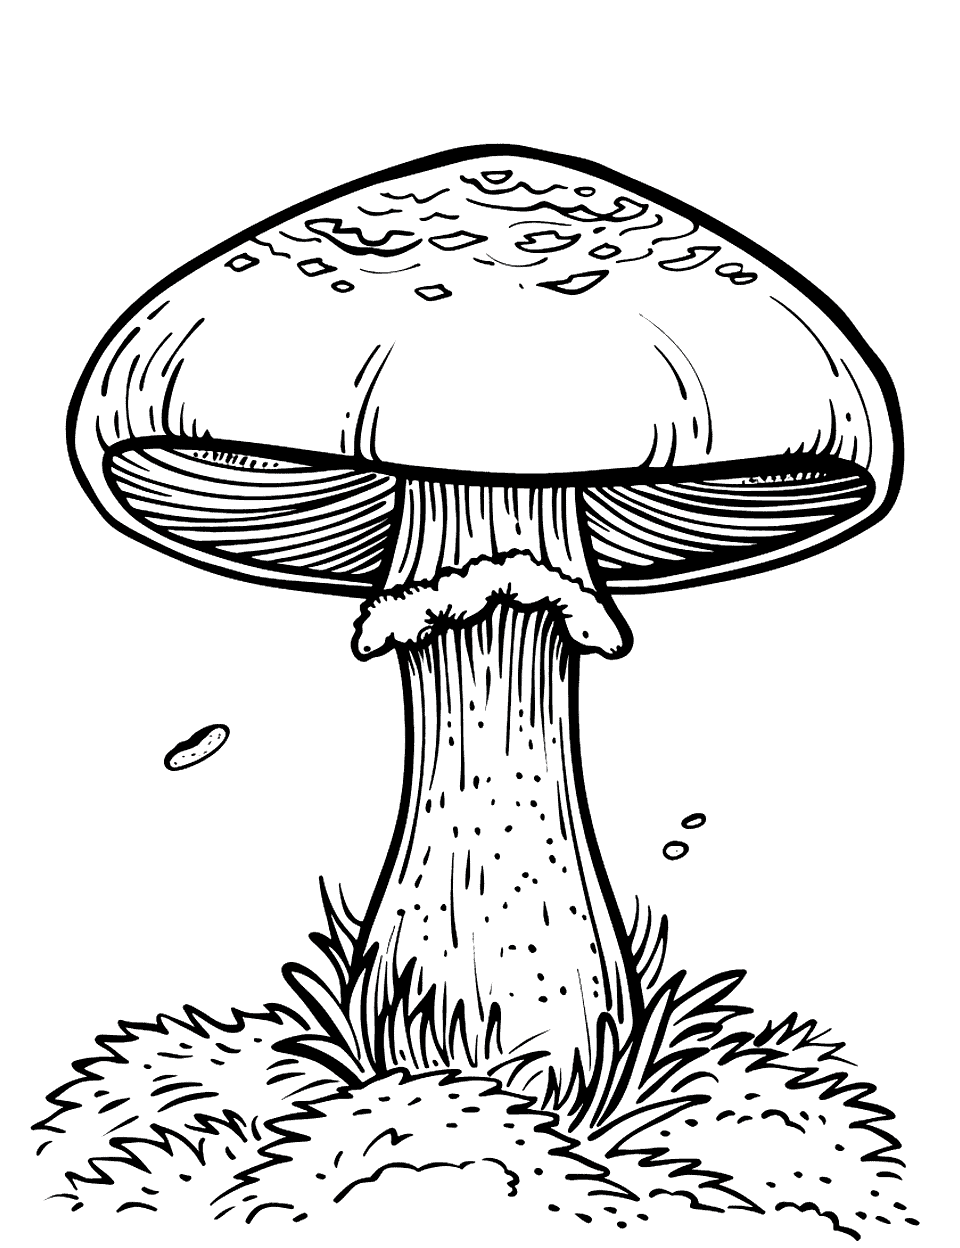 Shiitake Mushroom in the Wild Coloring Page - A single shiitake mushroom with detailed gills, standing alone on the forest floor.